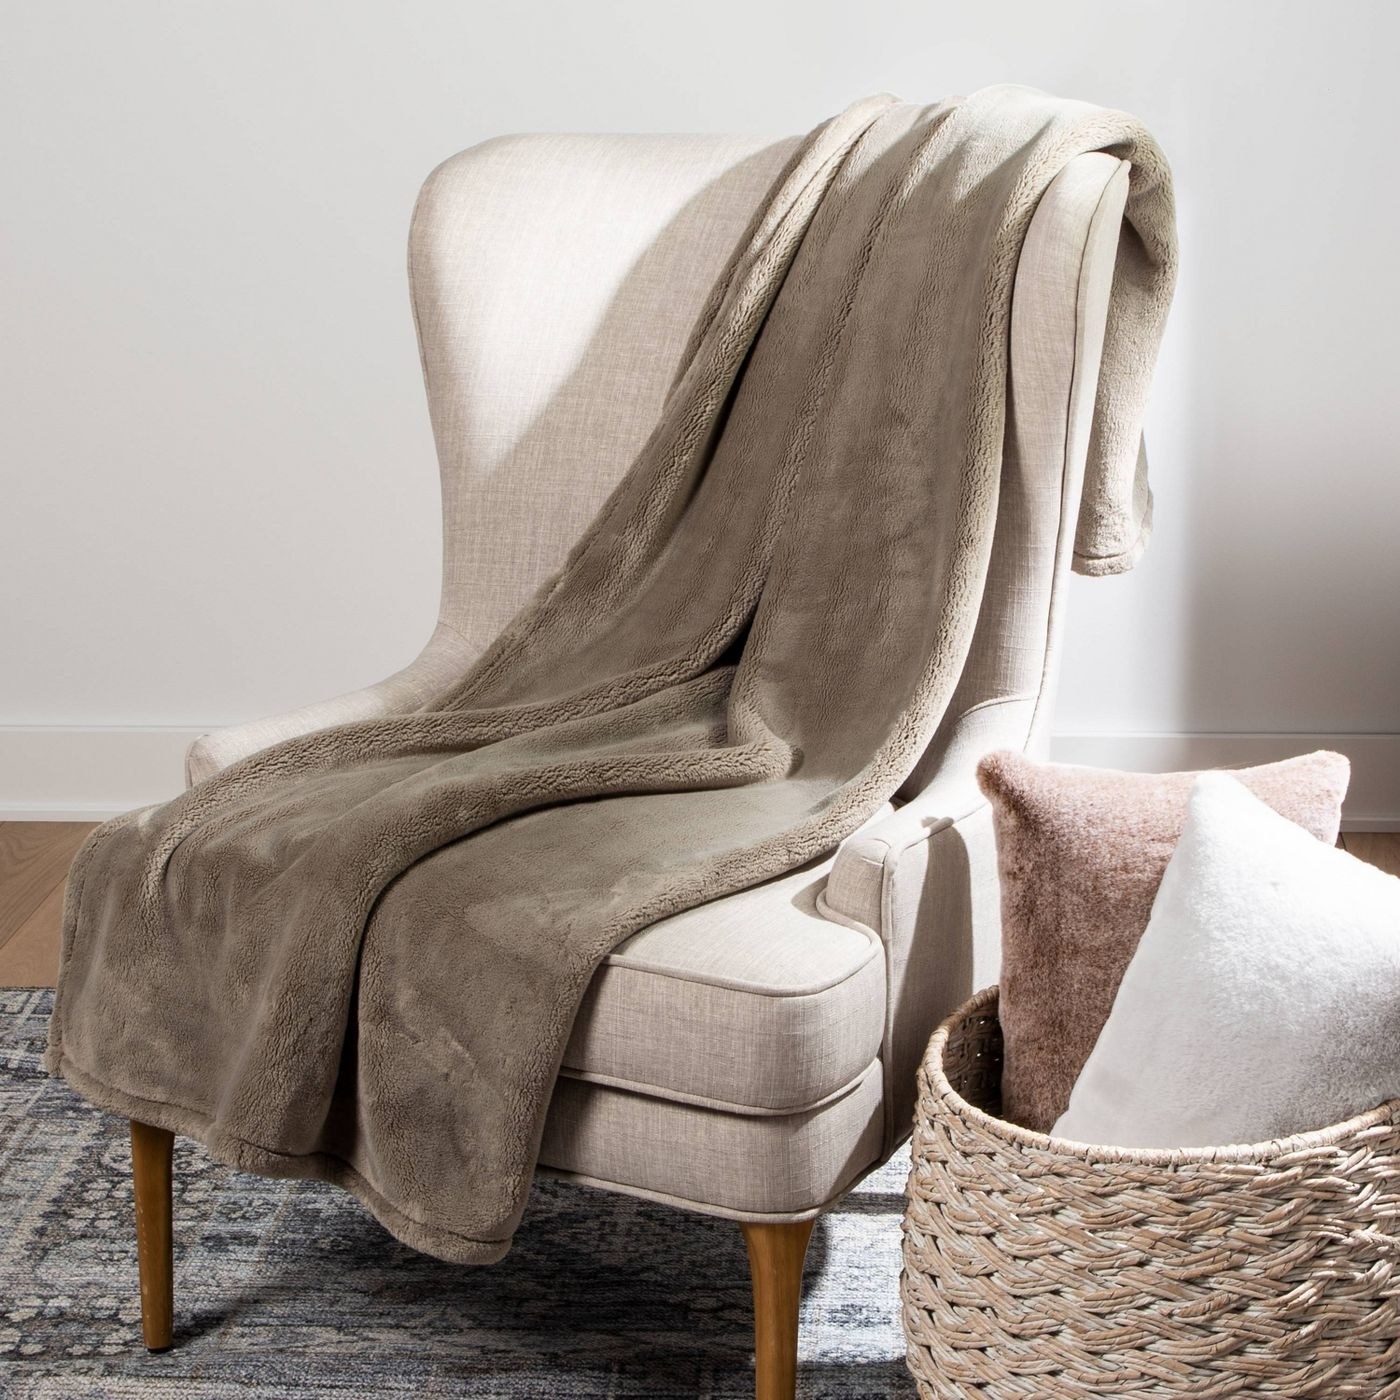 A taupe polyester blanket draped over a cozy chair